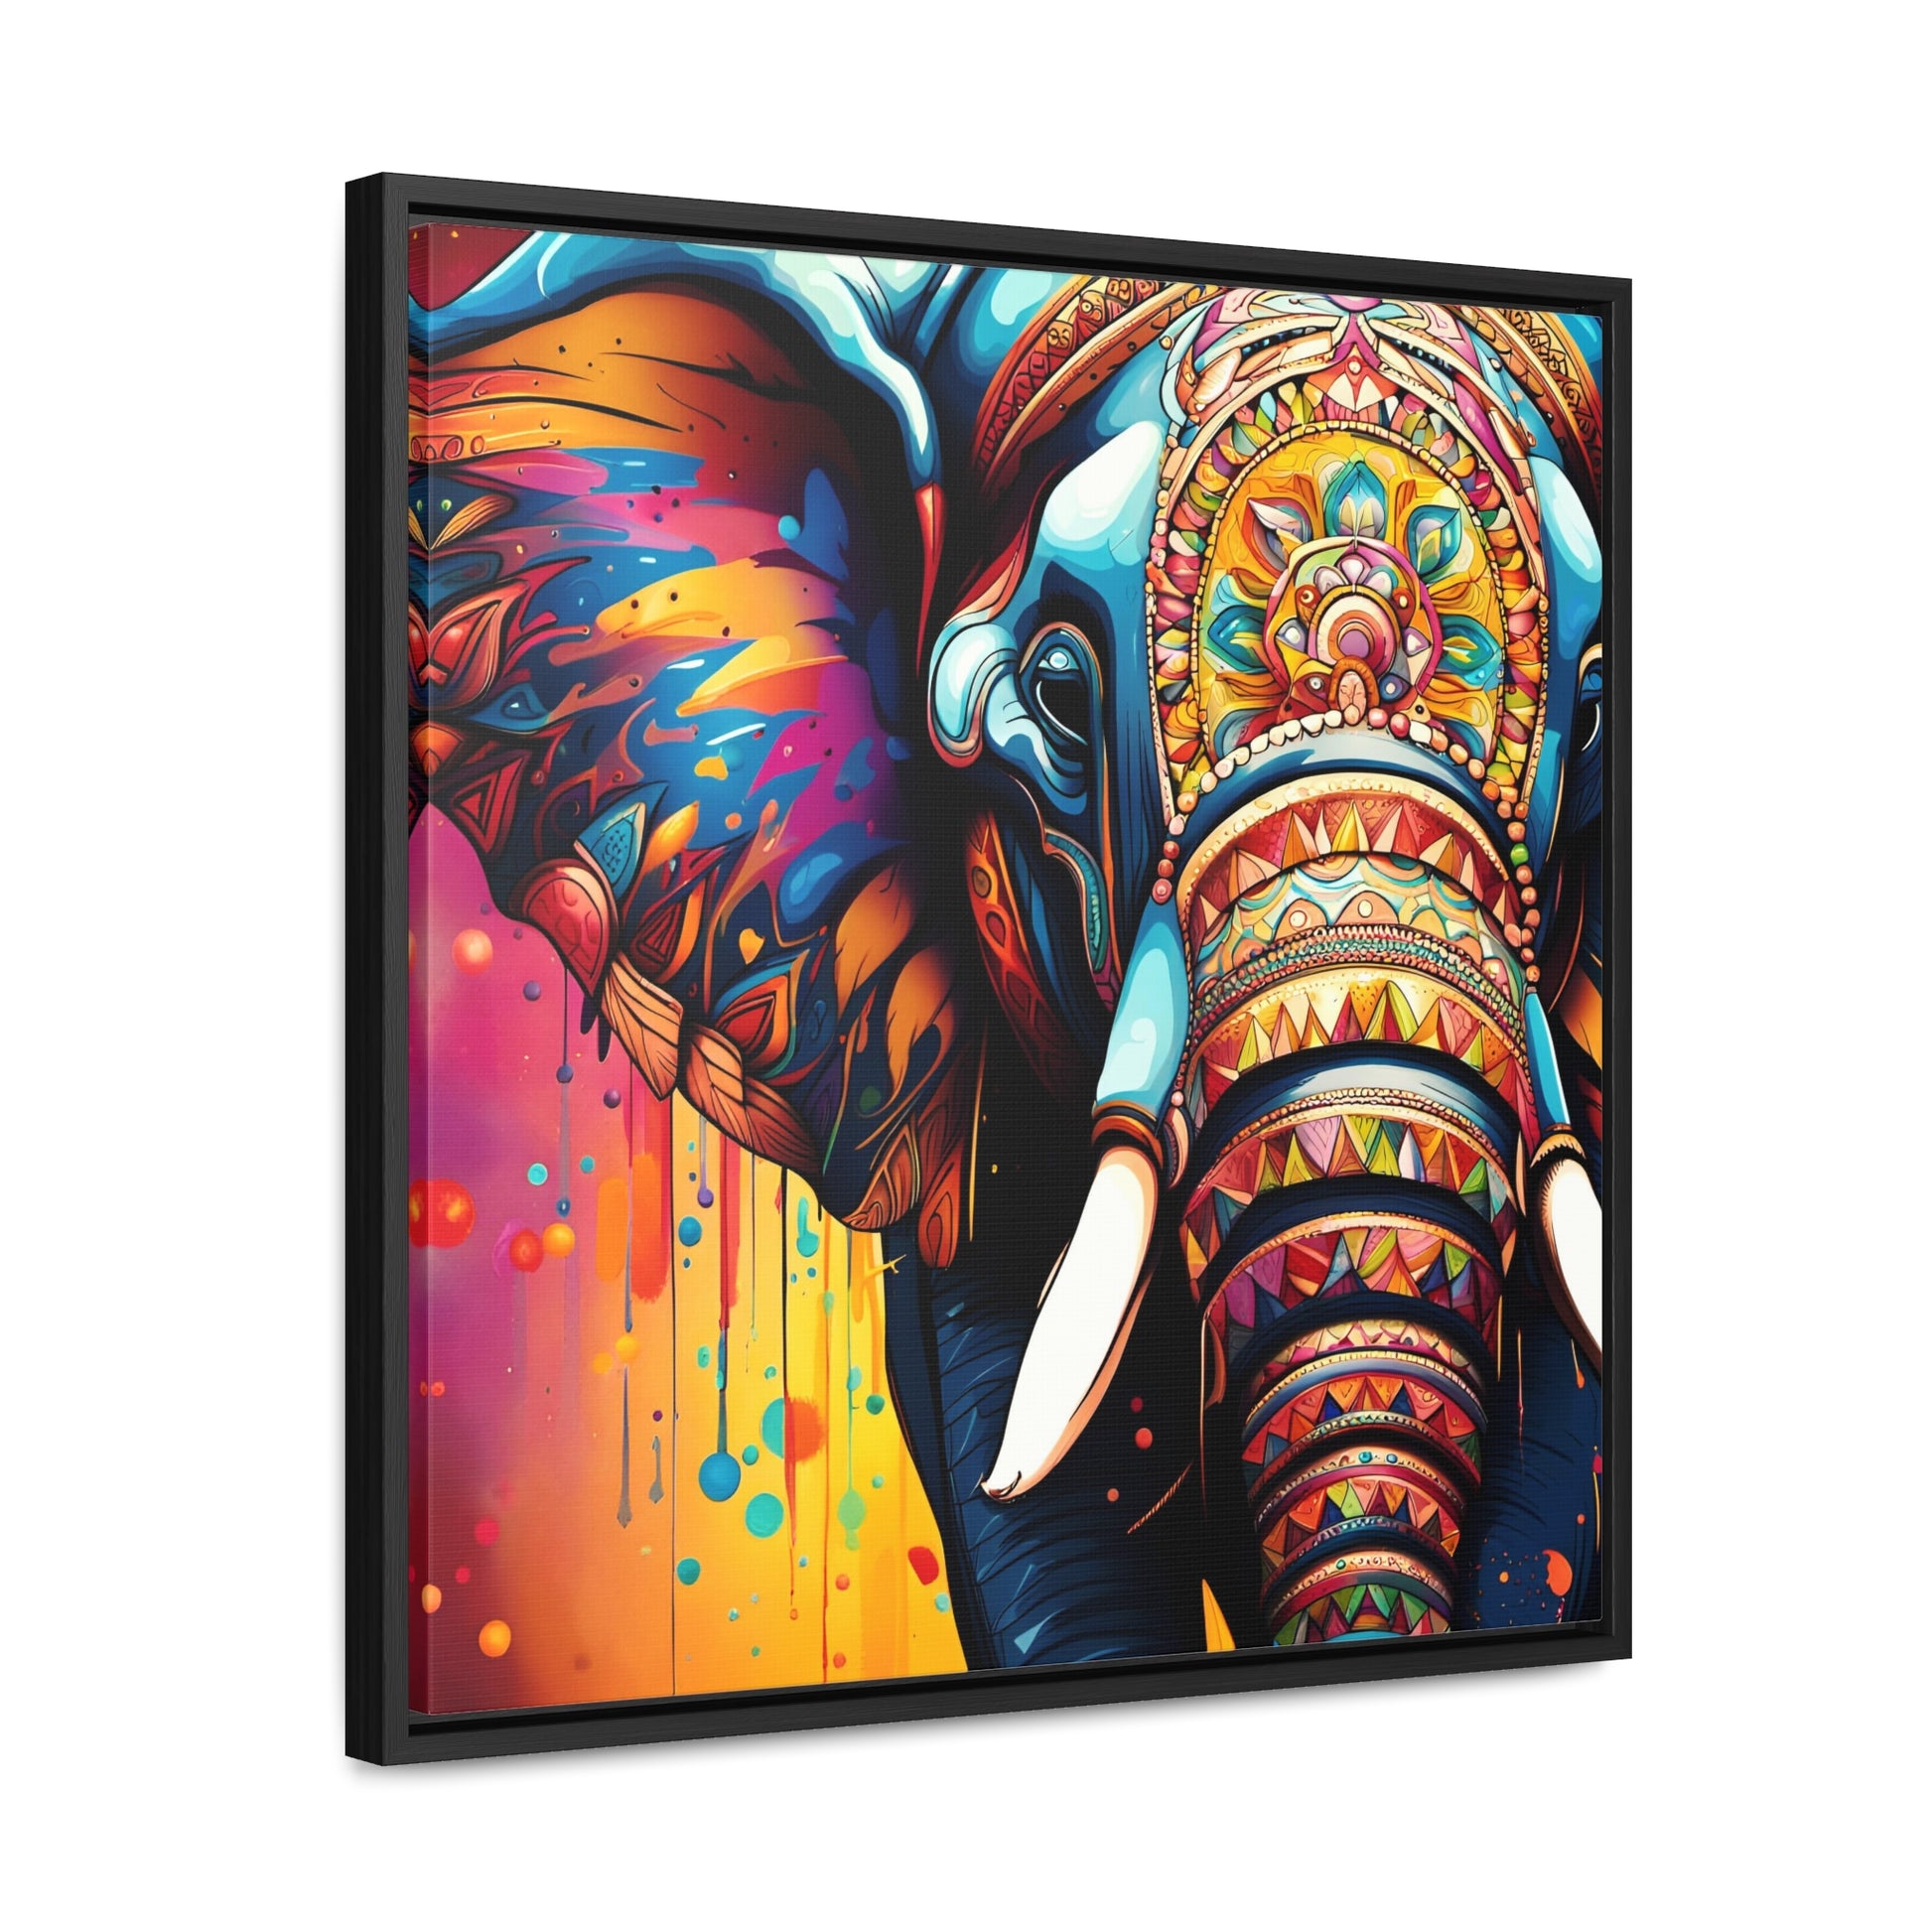 Stunning Multicolor Elephant Head Print on Canvas in a Floating Frame 36x36 side view